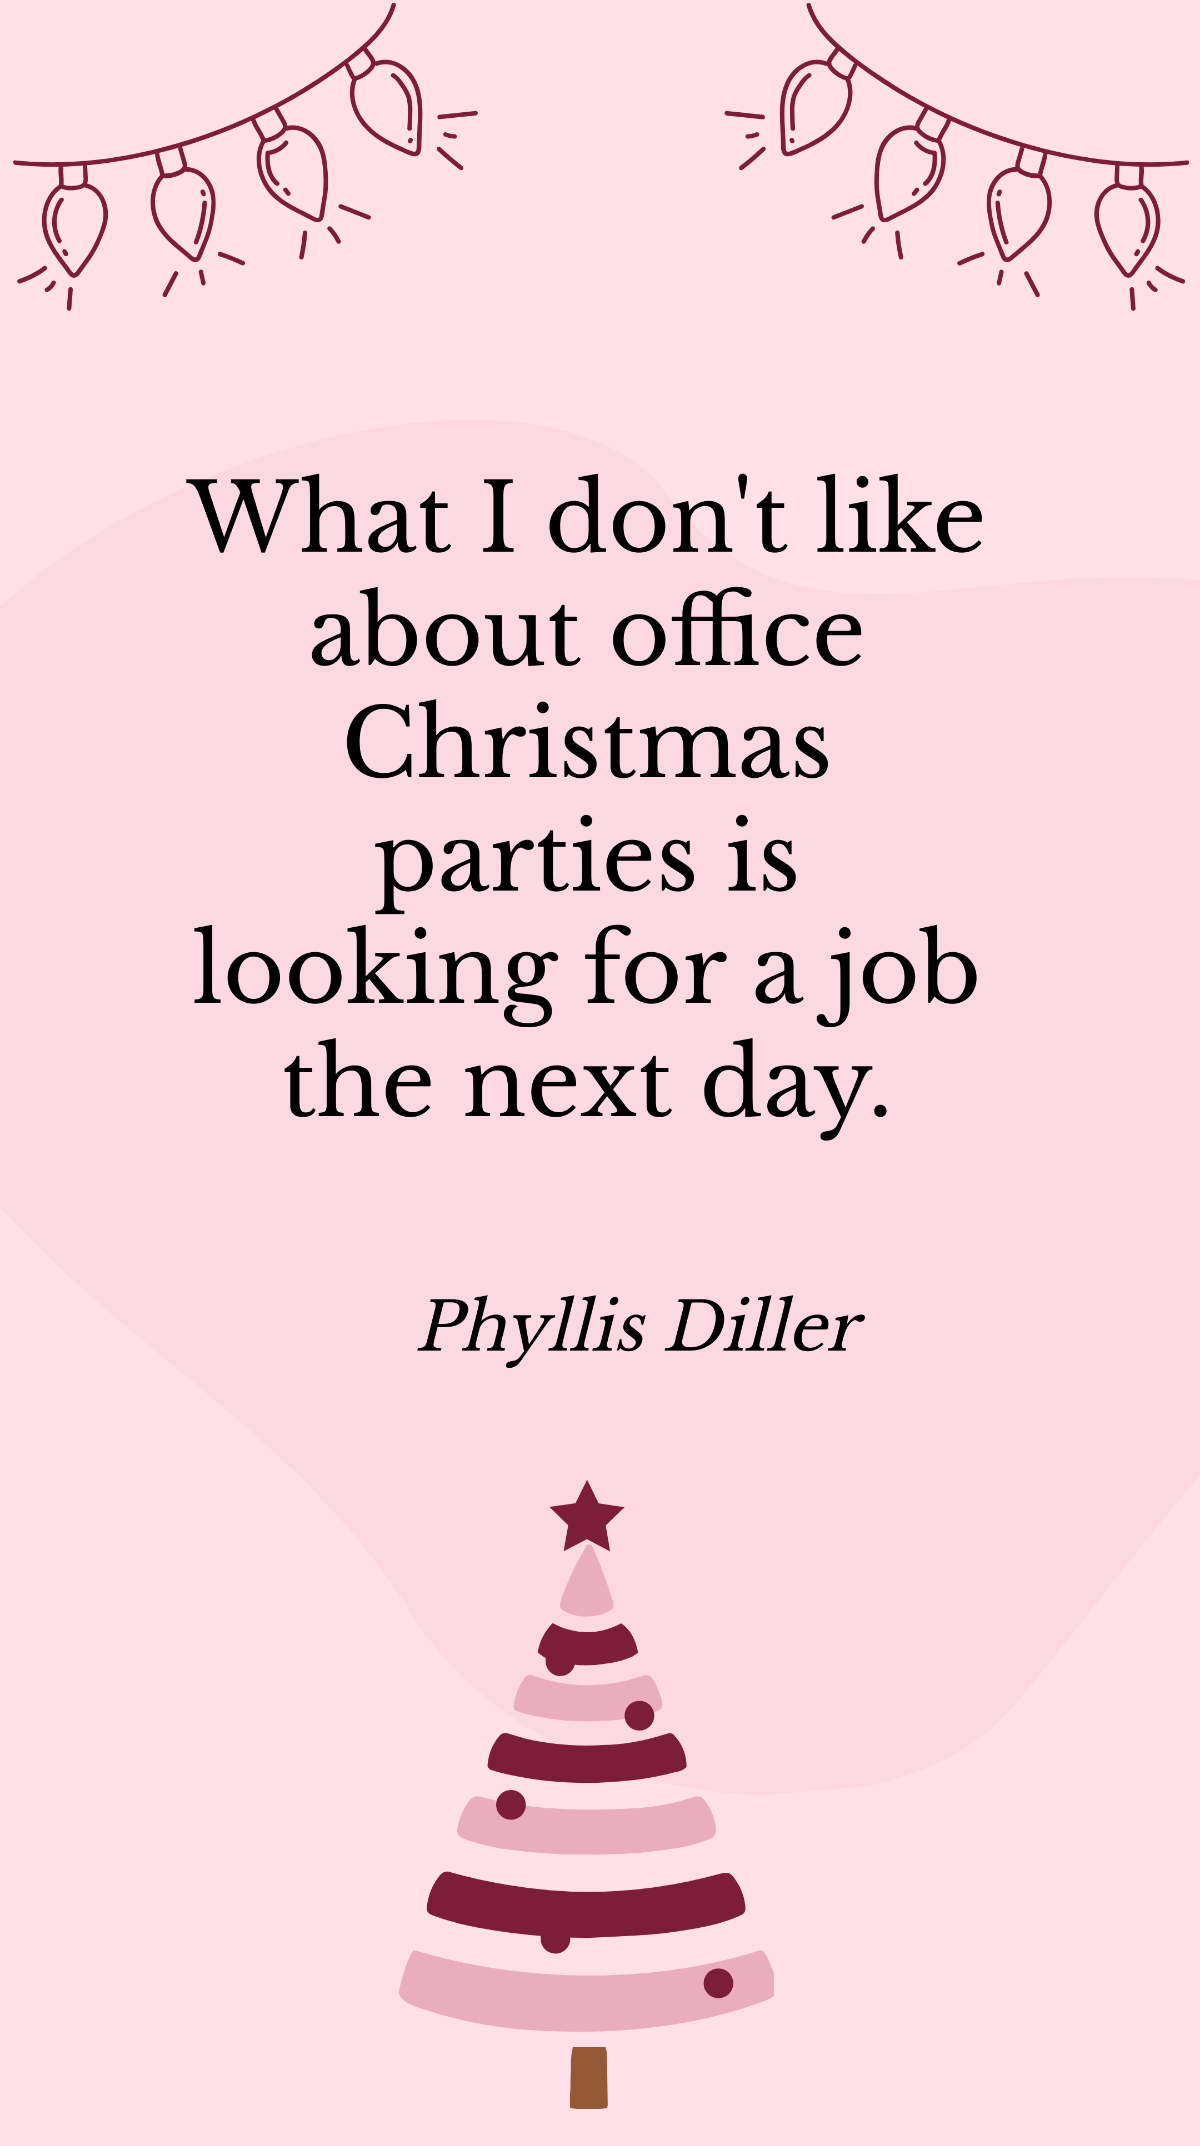 Phyllis Diller - What I don't like about office Christmas parties is looking for a job the next day. Template